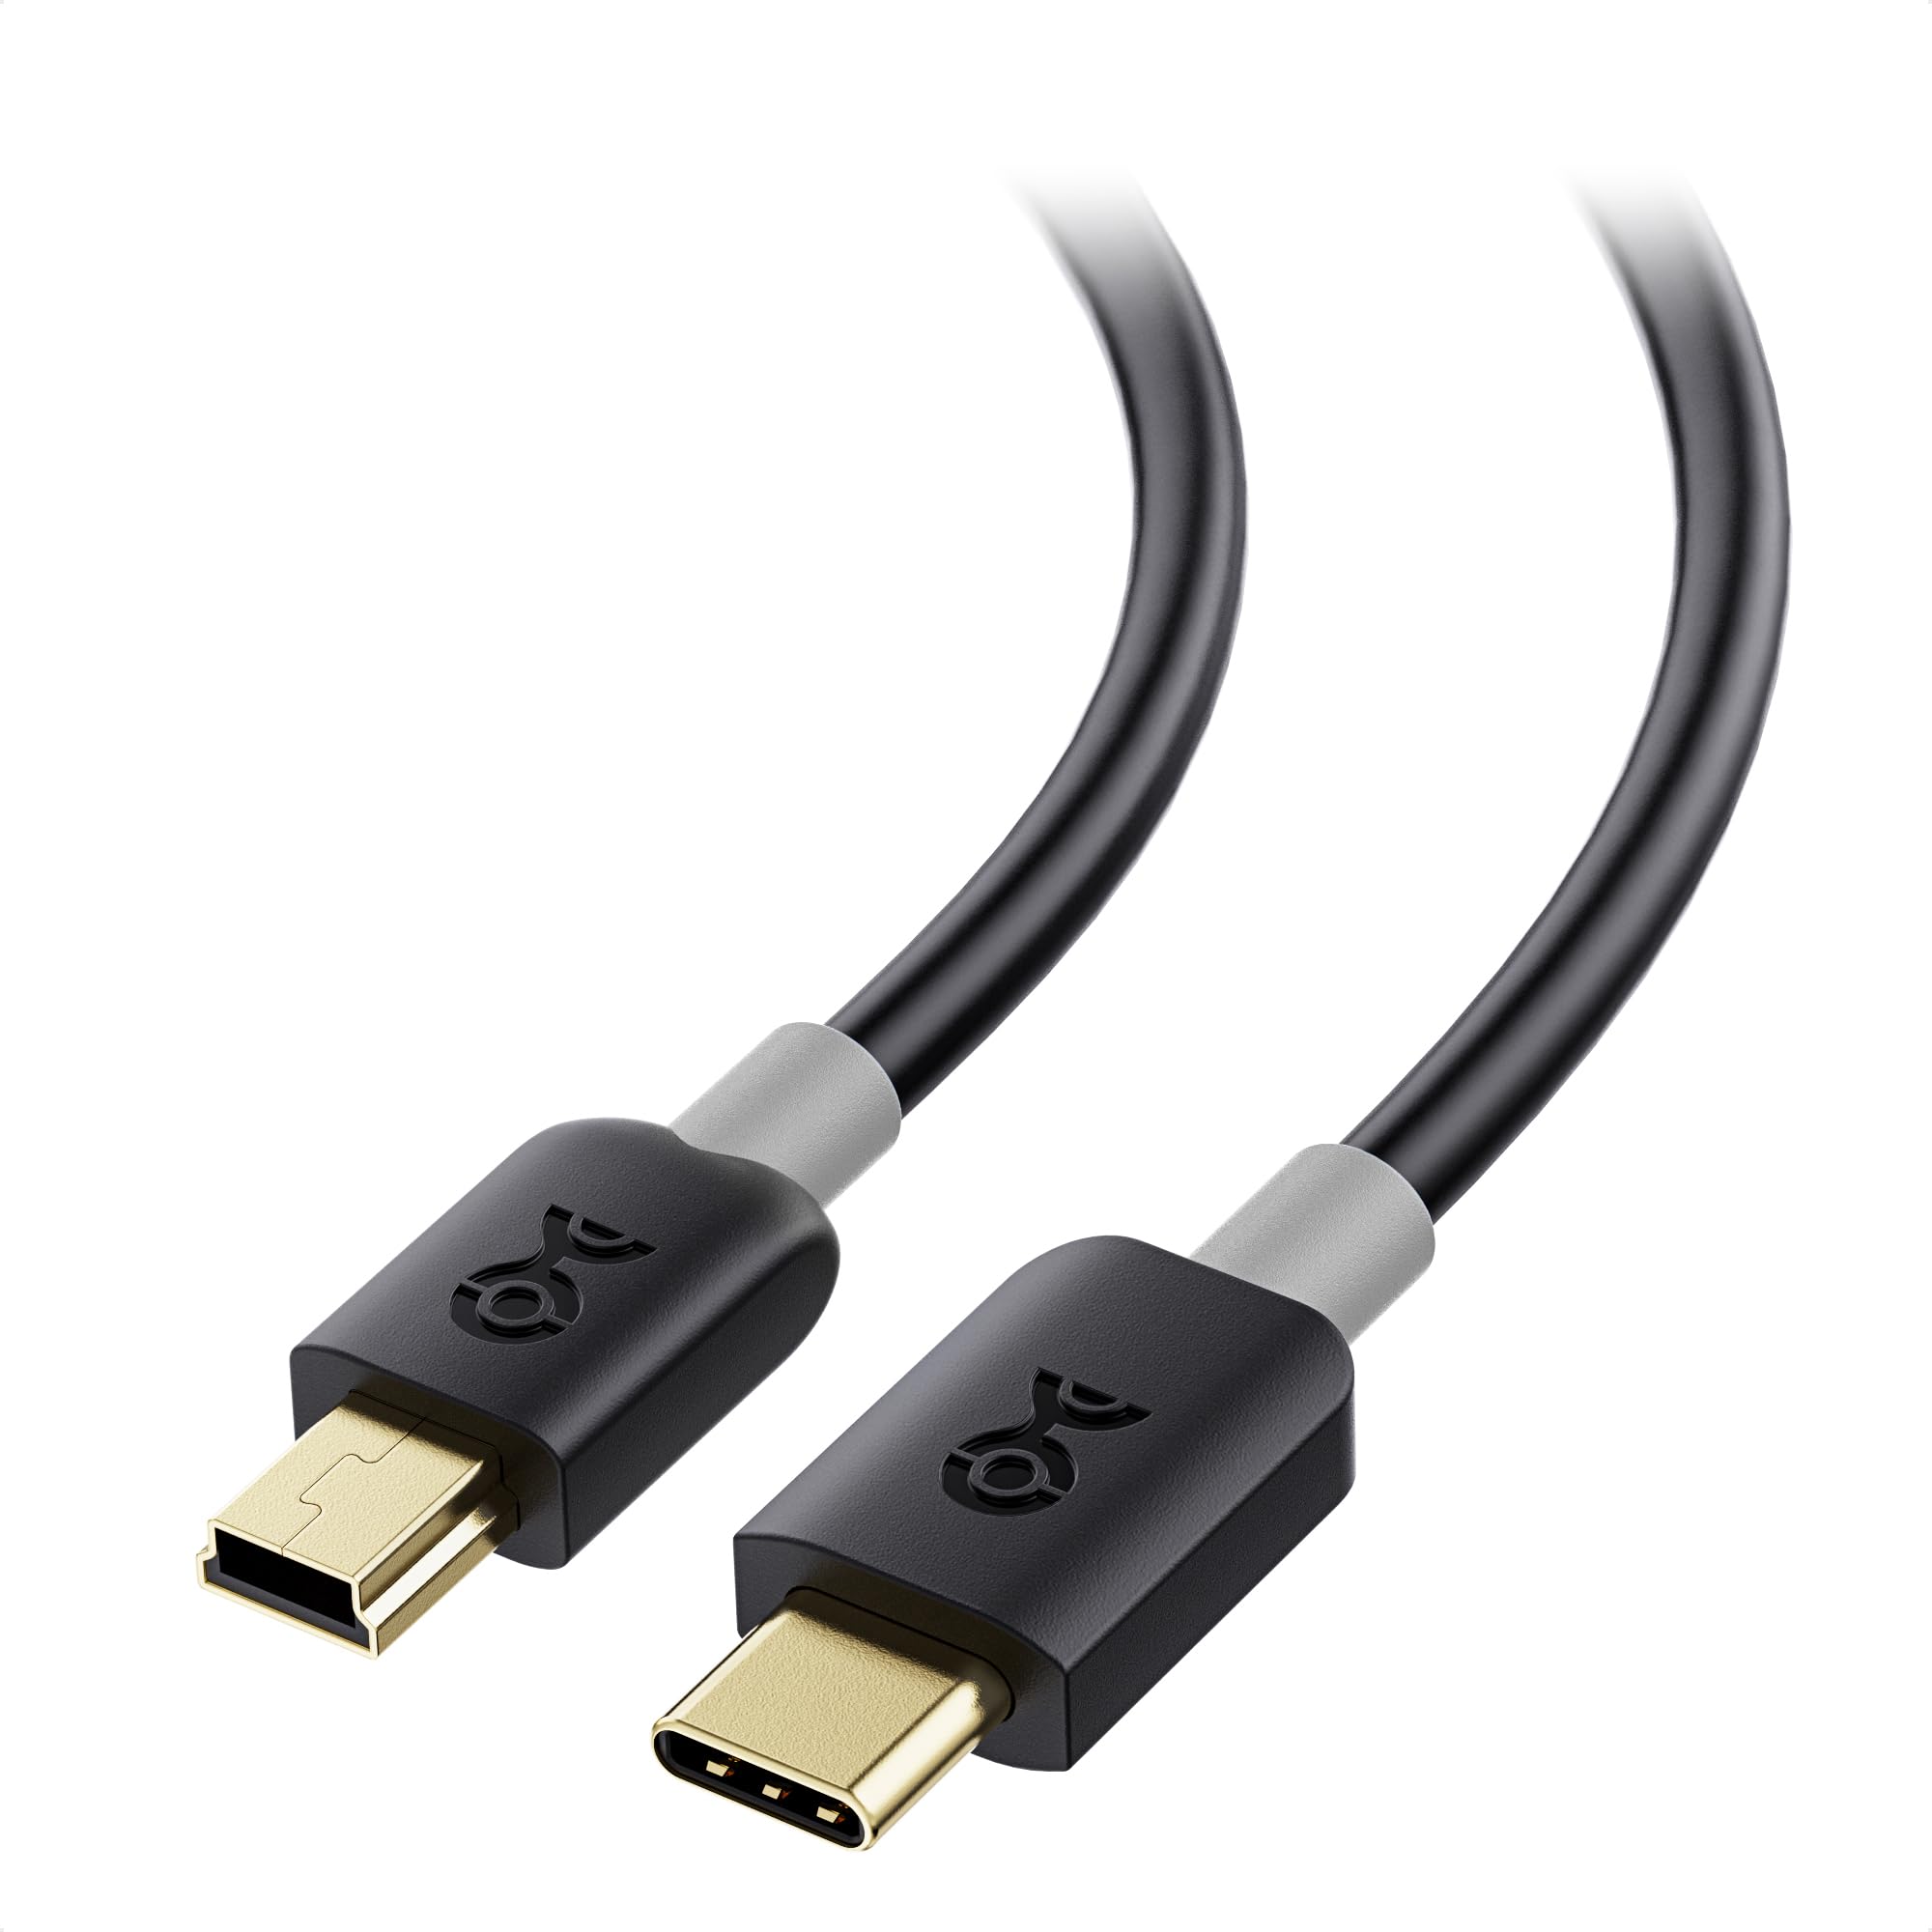 USB cable with a question mark